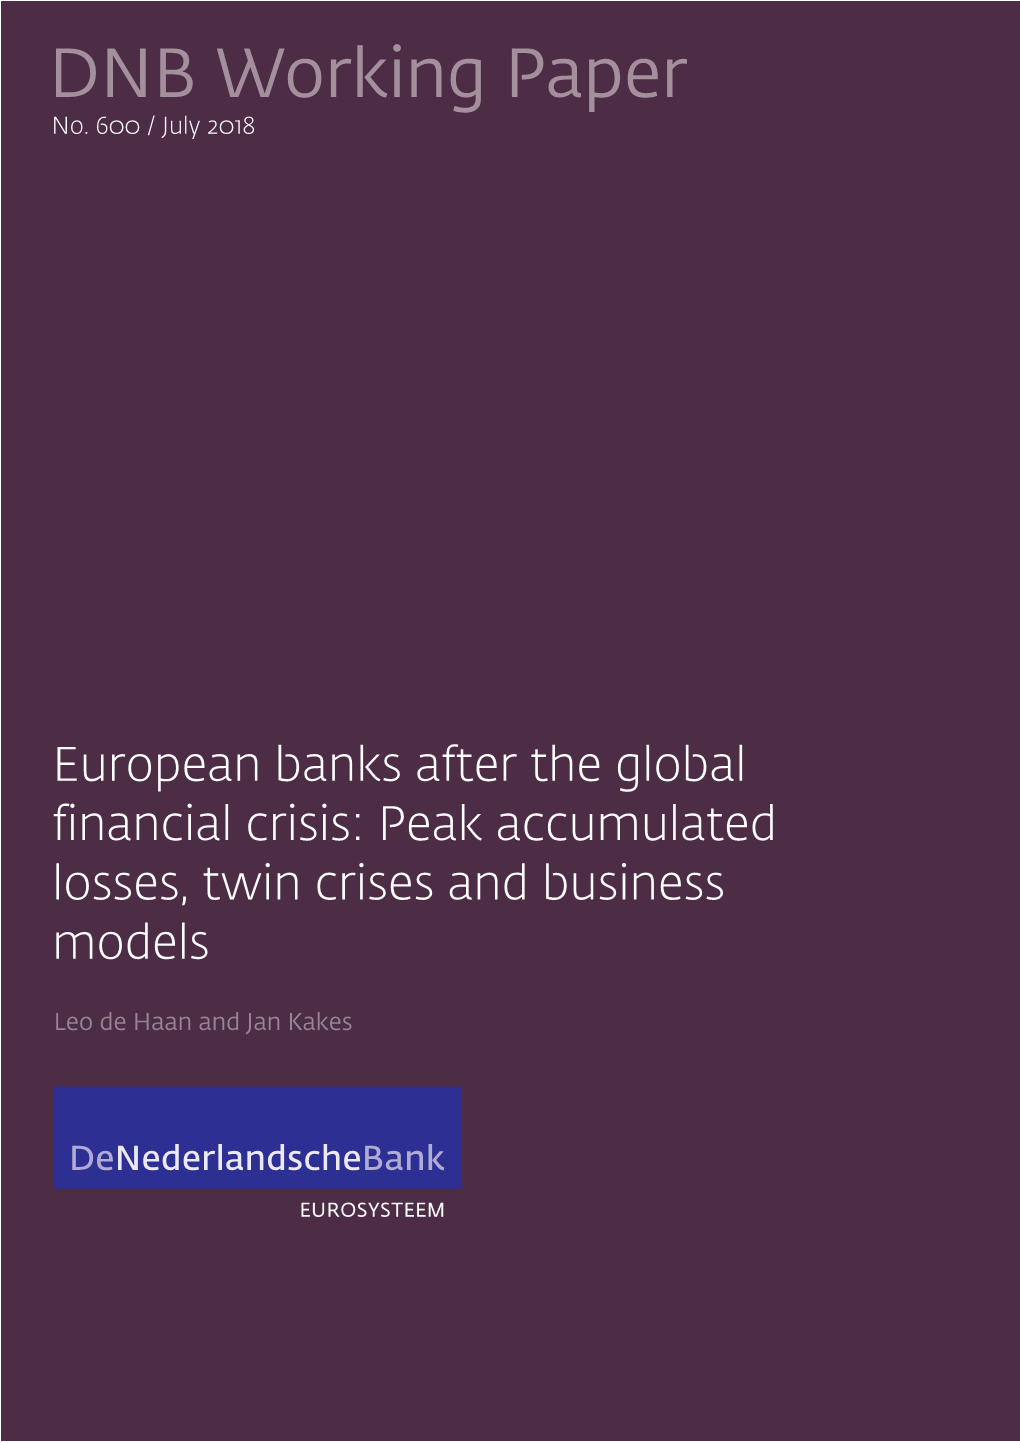 Peak Accumulated Losses, Twin Crises and Business Models